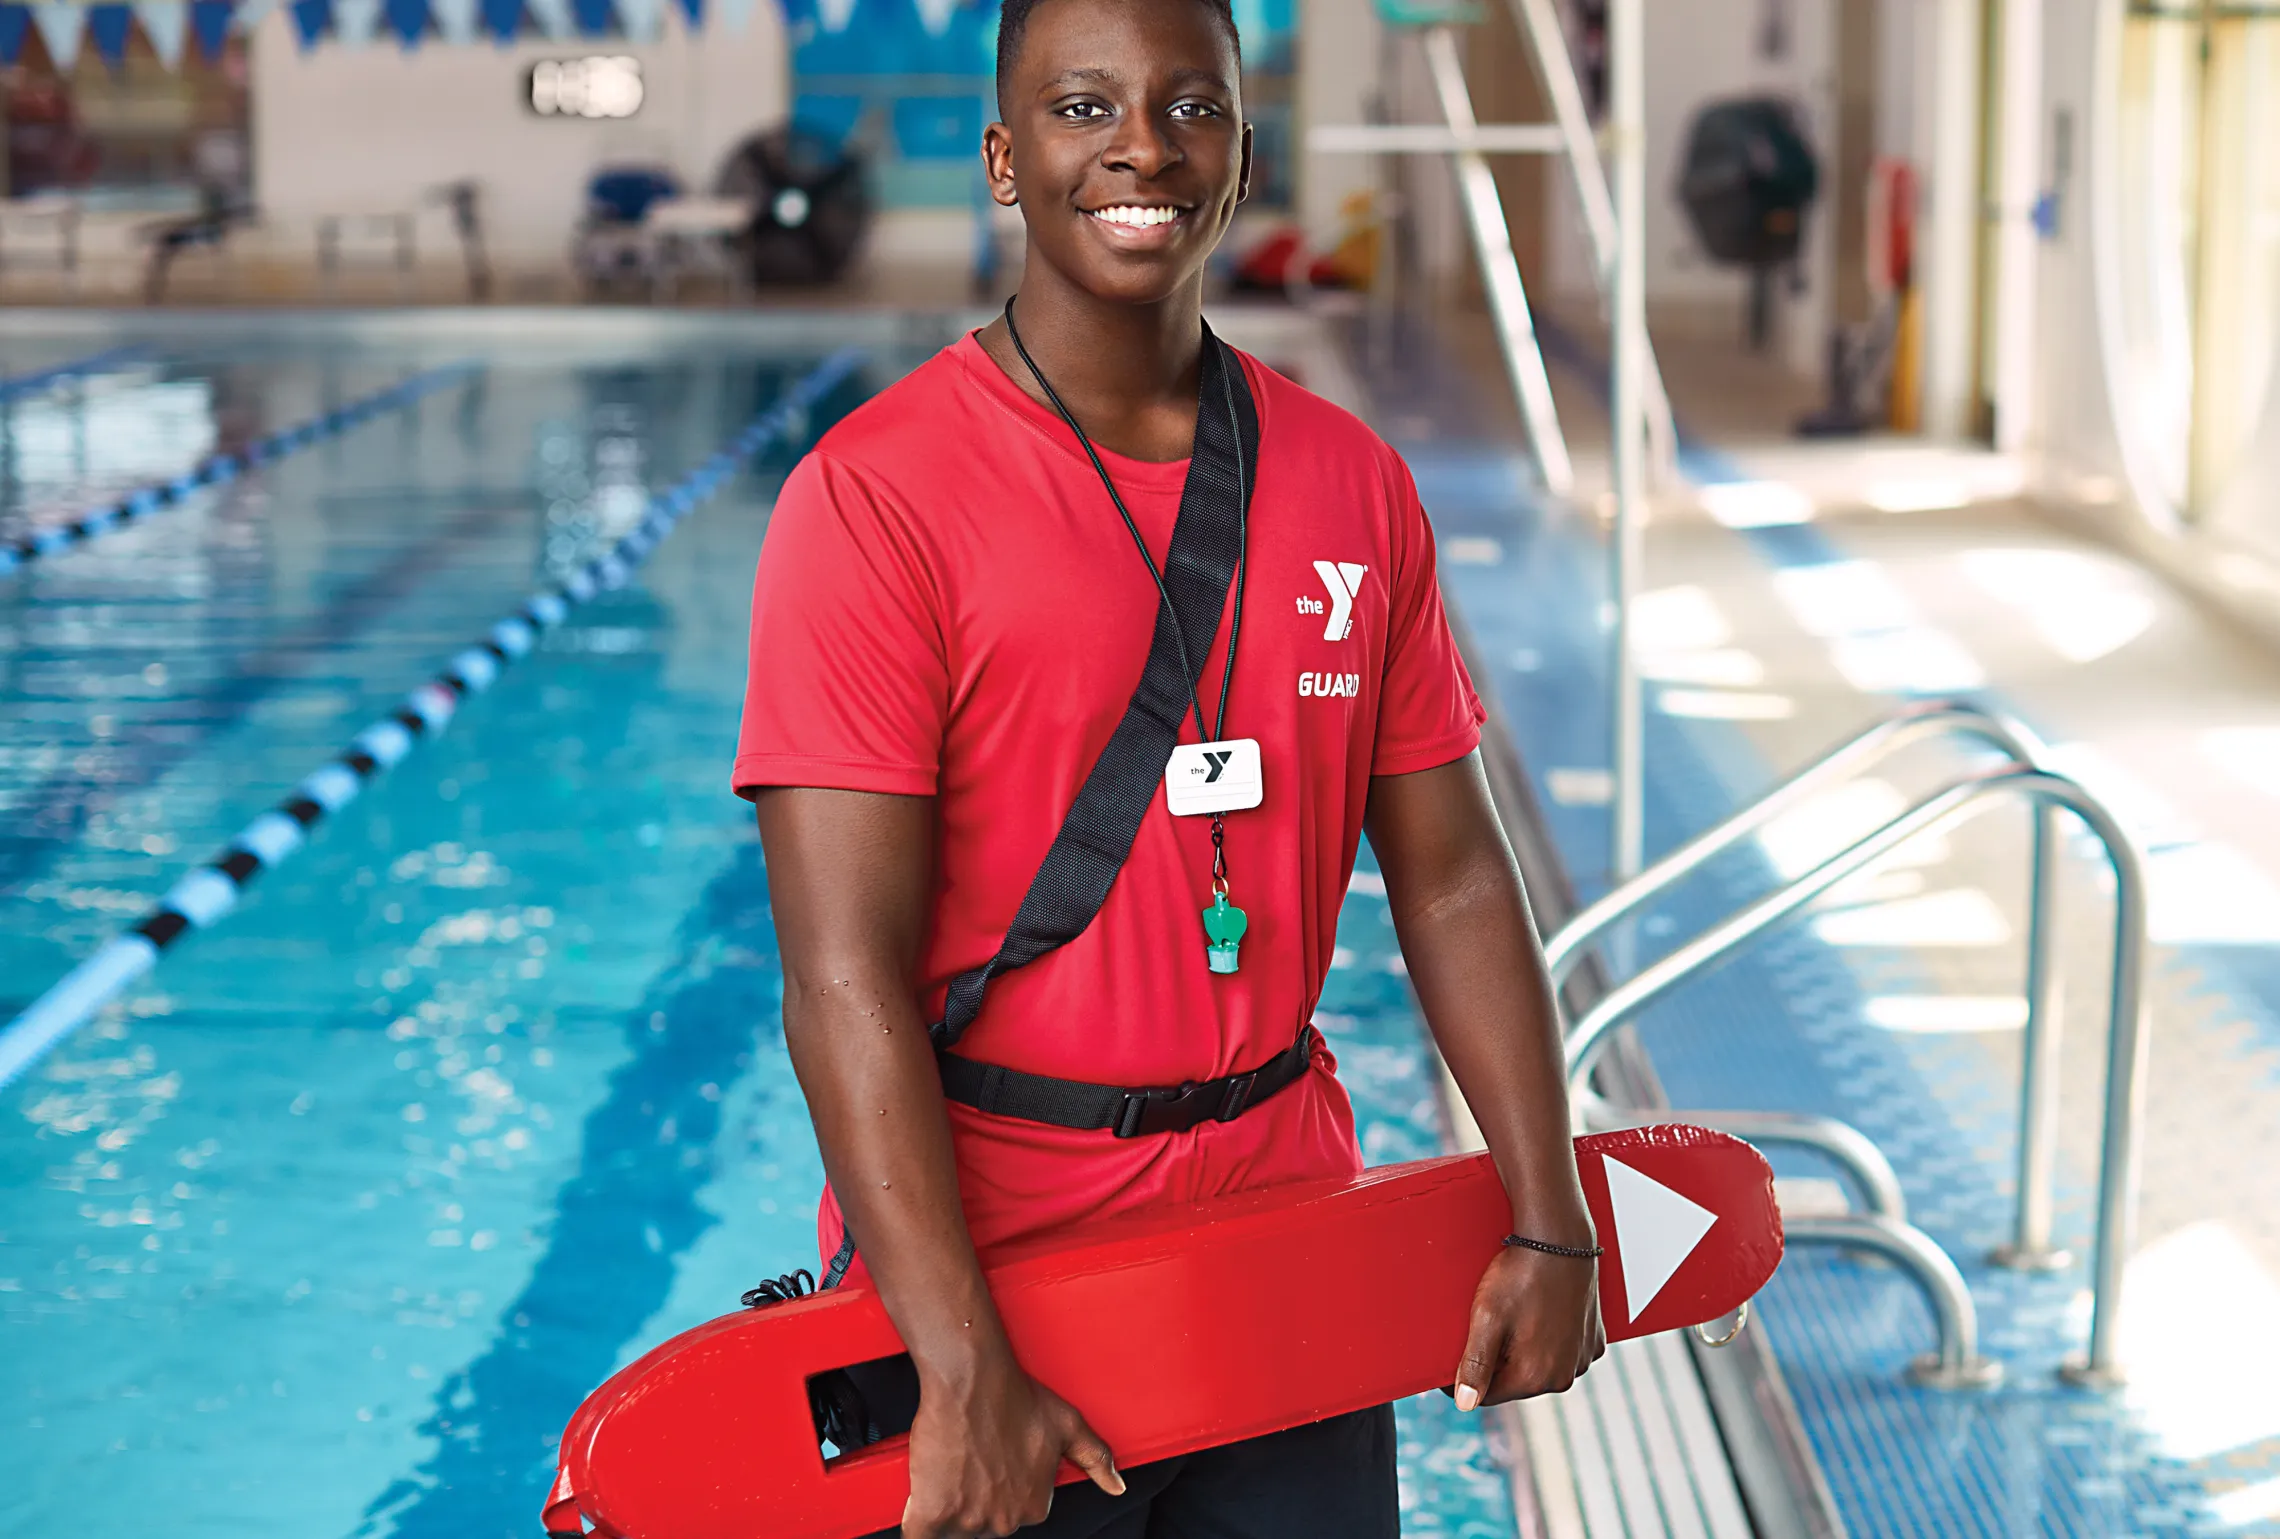 Young teen proudly completes lifeguard training